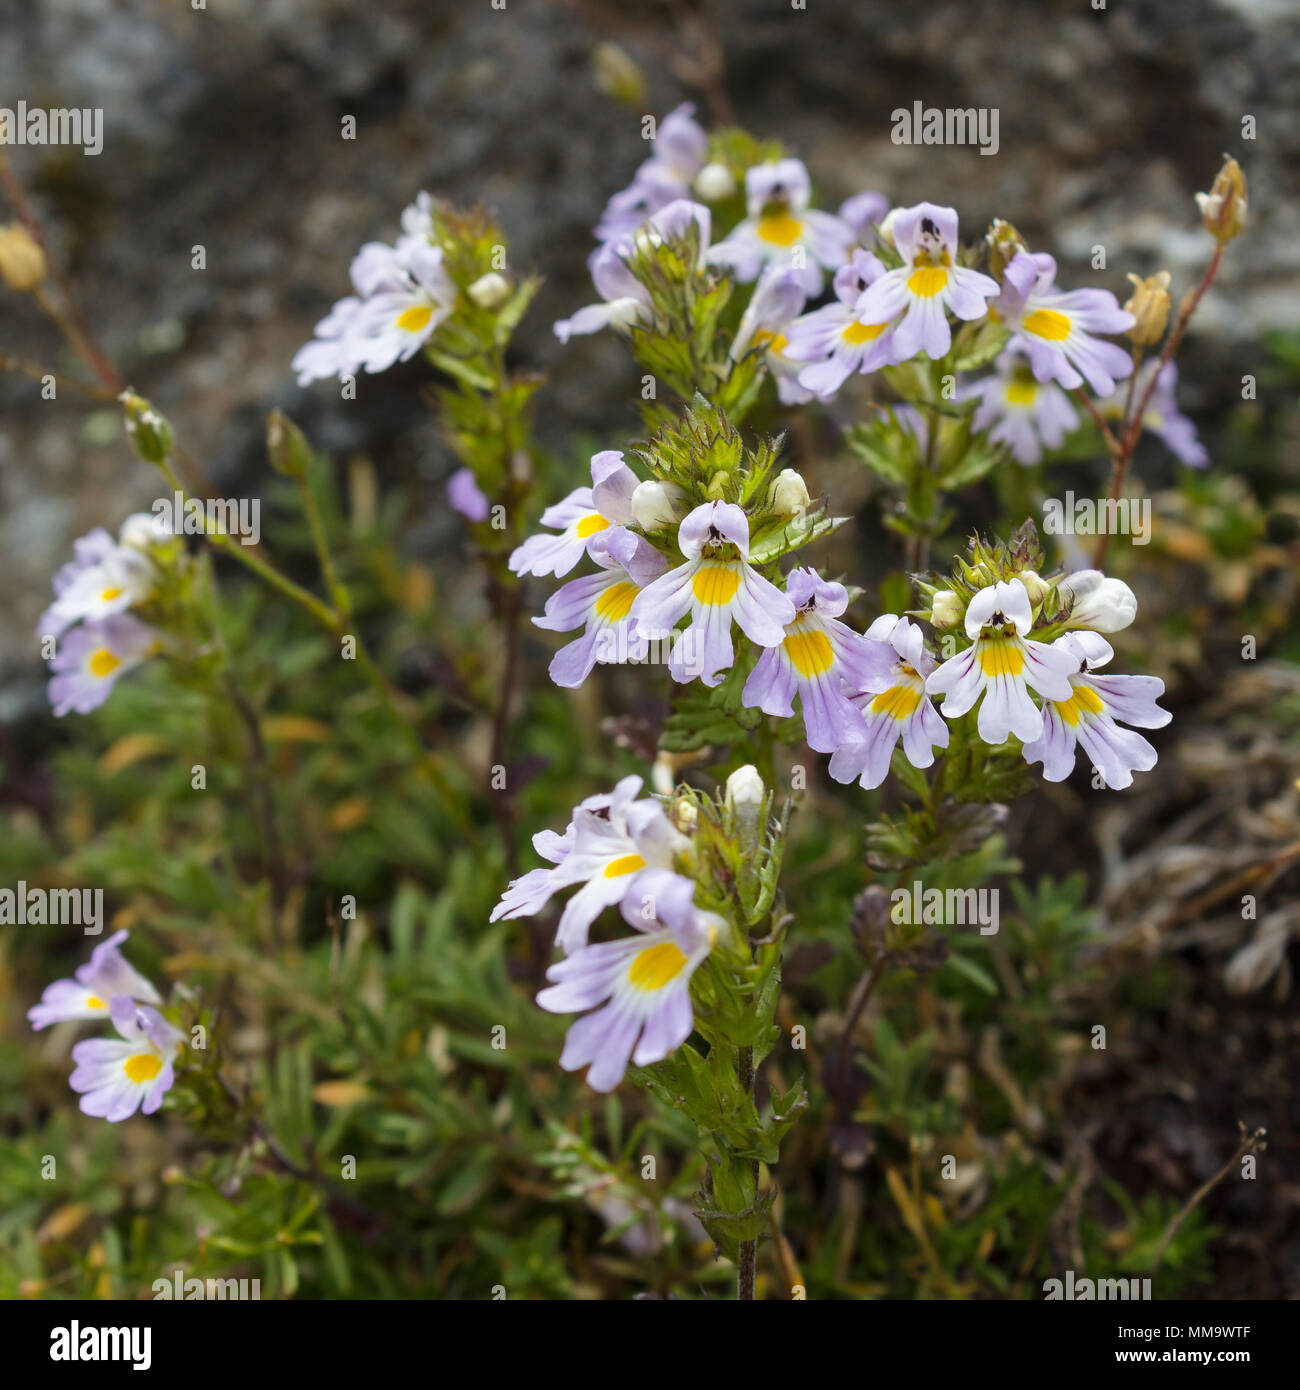 Alpine wild flower, Euphrasia Alpina (Eyebright) at 2600 meters of altitude. Aosta valley, Italy. Eyebright is used in treating eye infections. Stock Photo